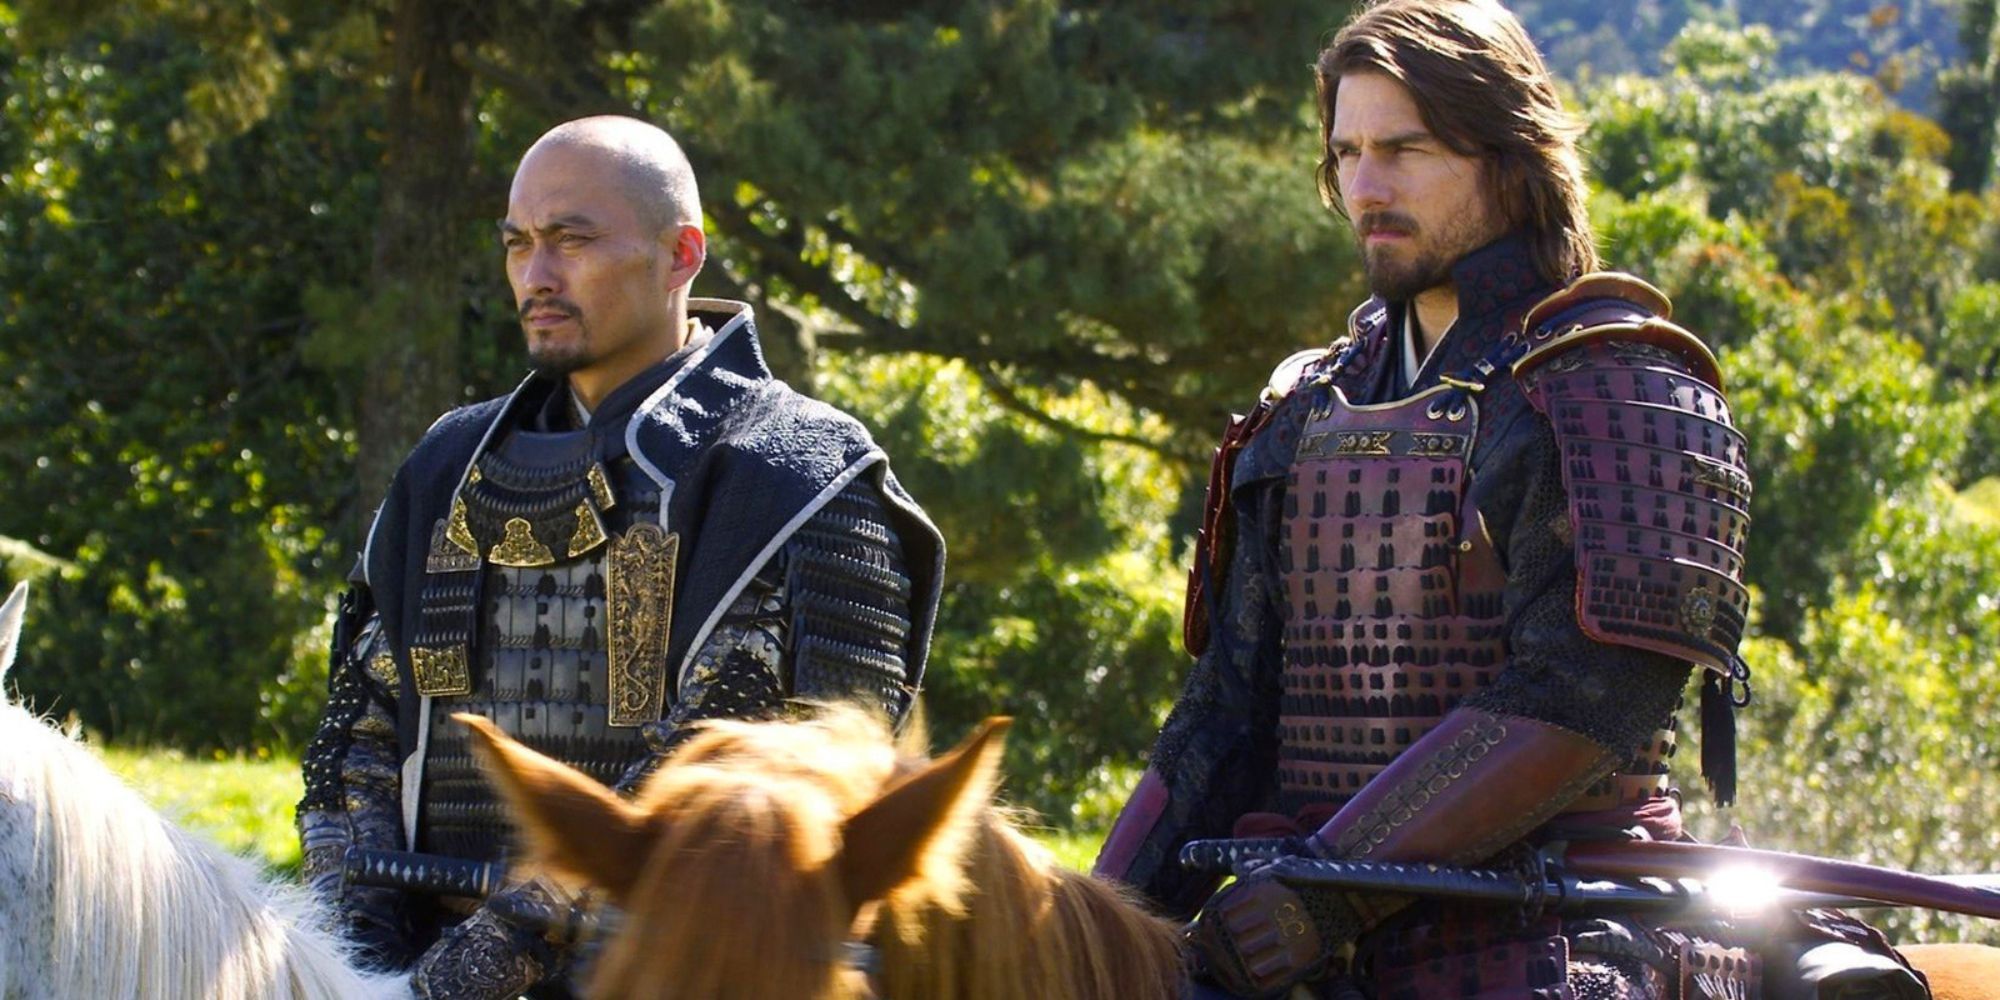 Tom Cruise as Nathan Algren and Ken Watanabe as Katsumoto ride together in The Last Samurai 